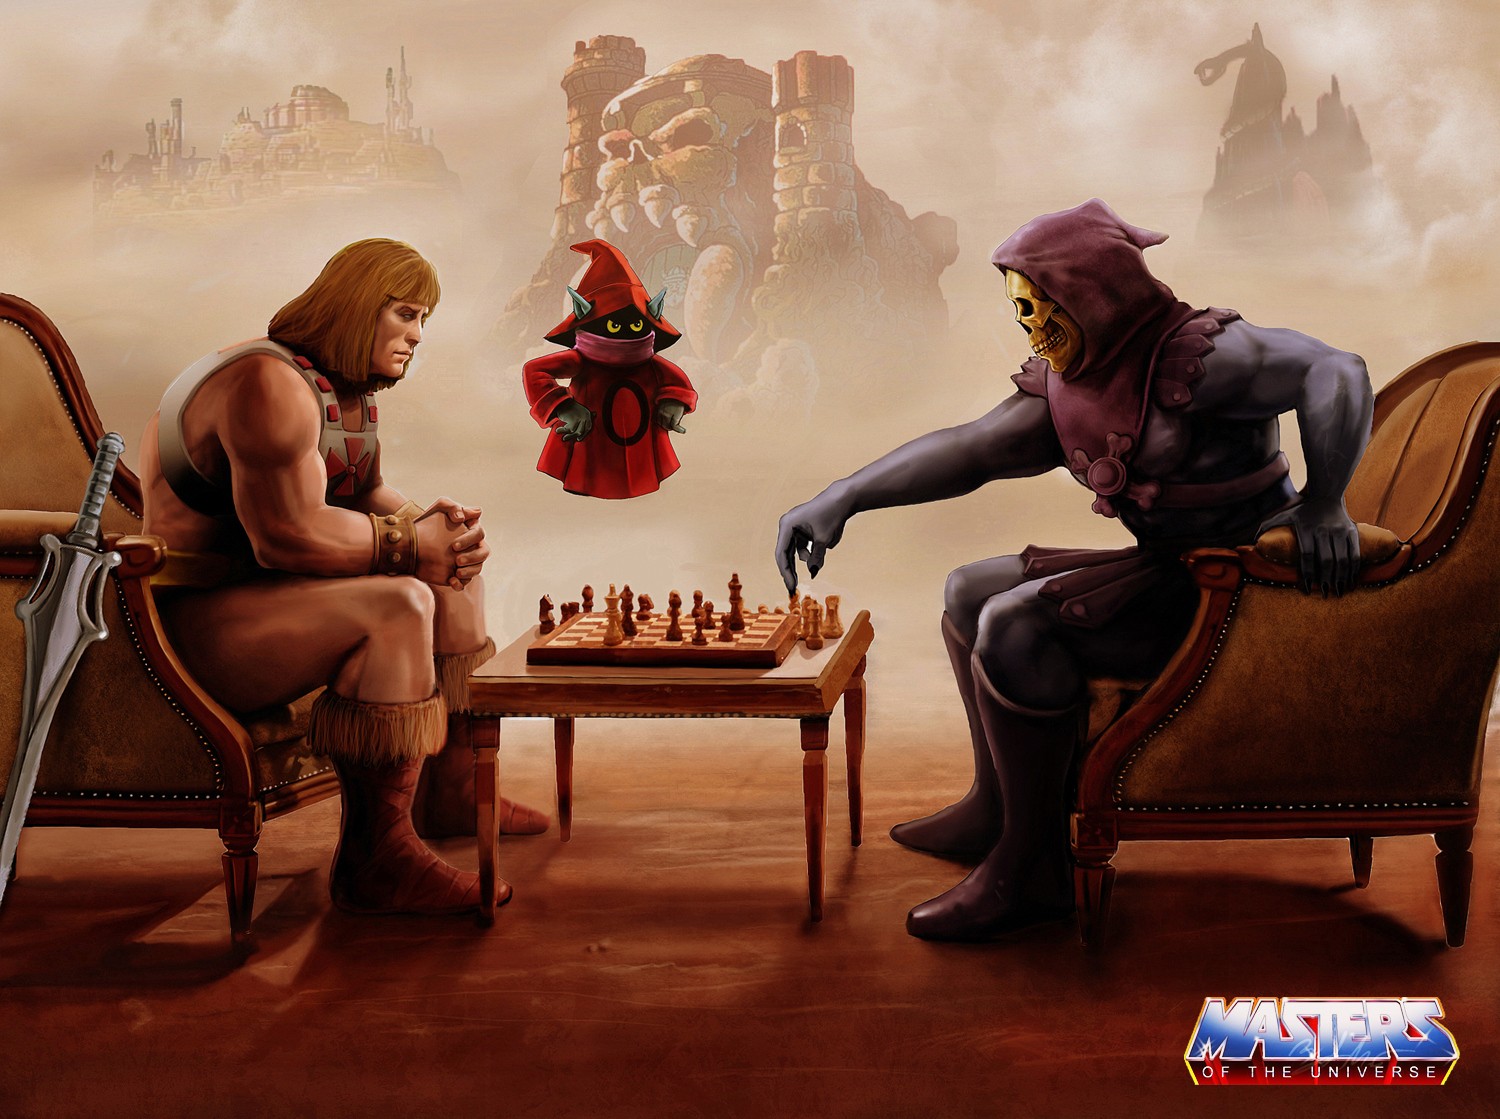 General 1500x1119 He-Man Skeletor chess Orko Masters of the Universe TV series